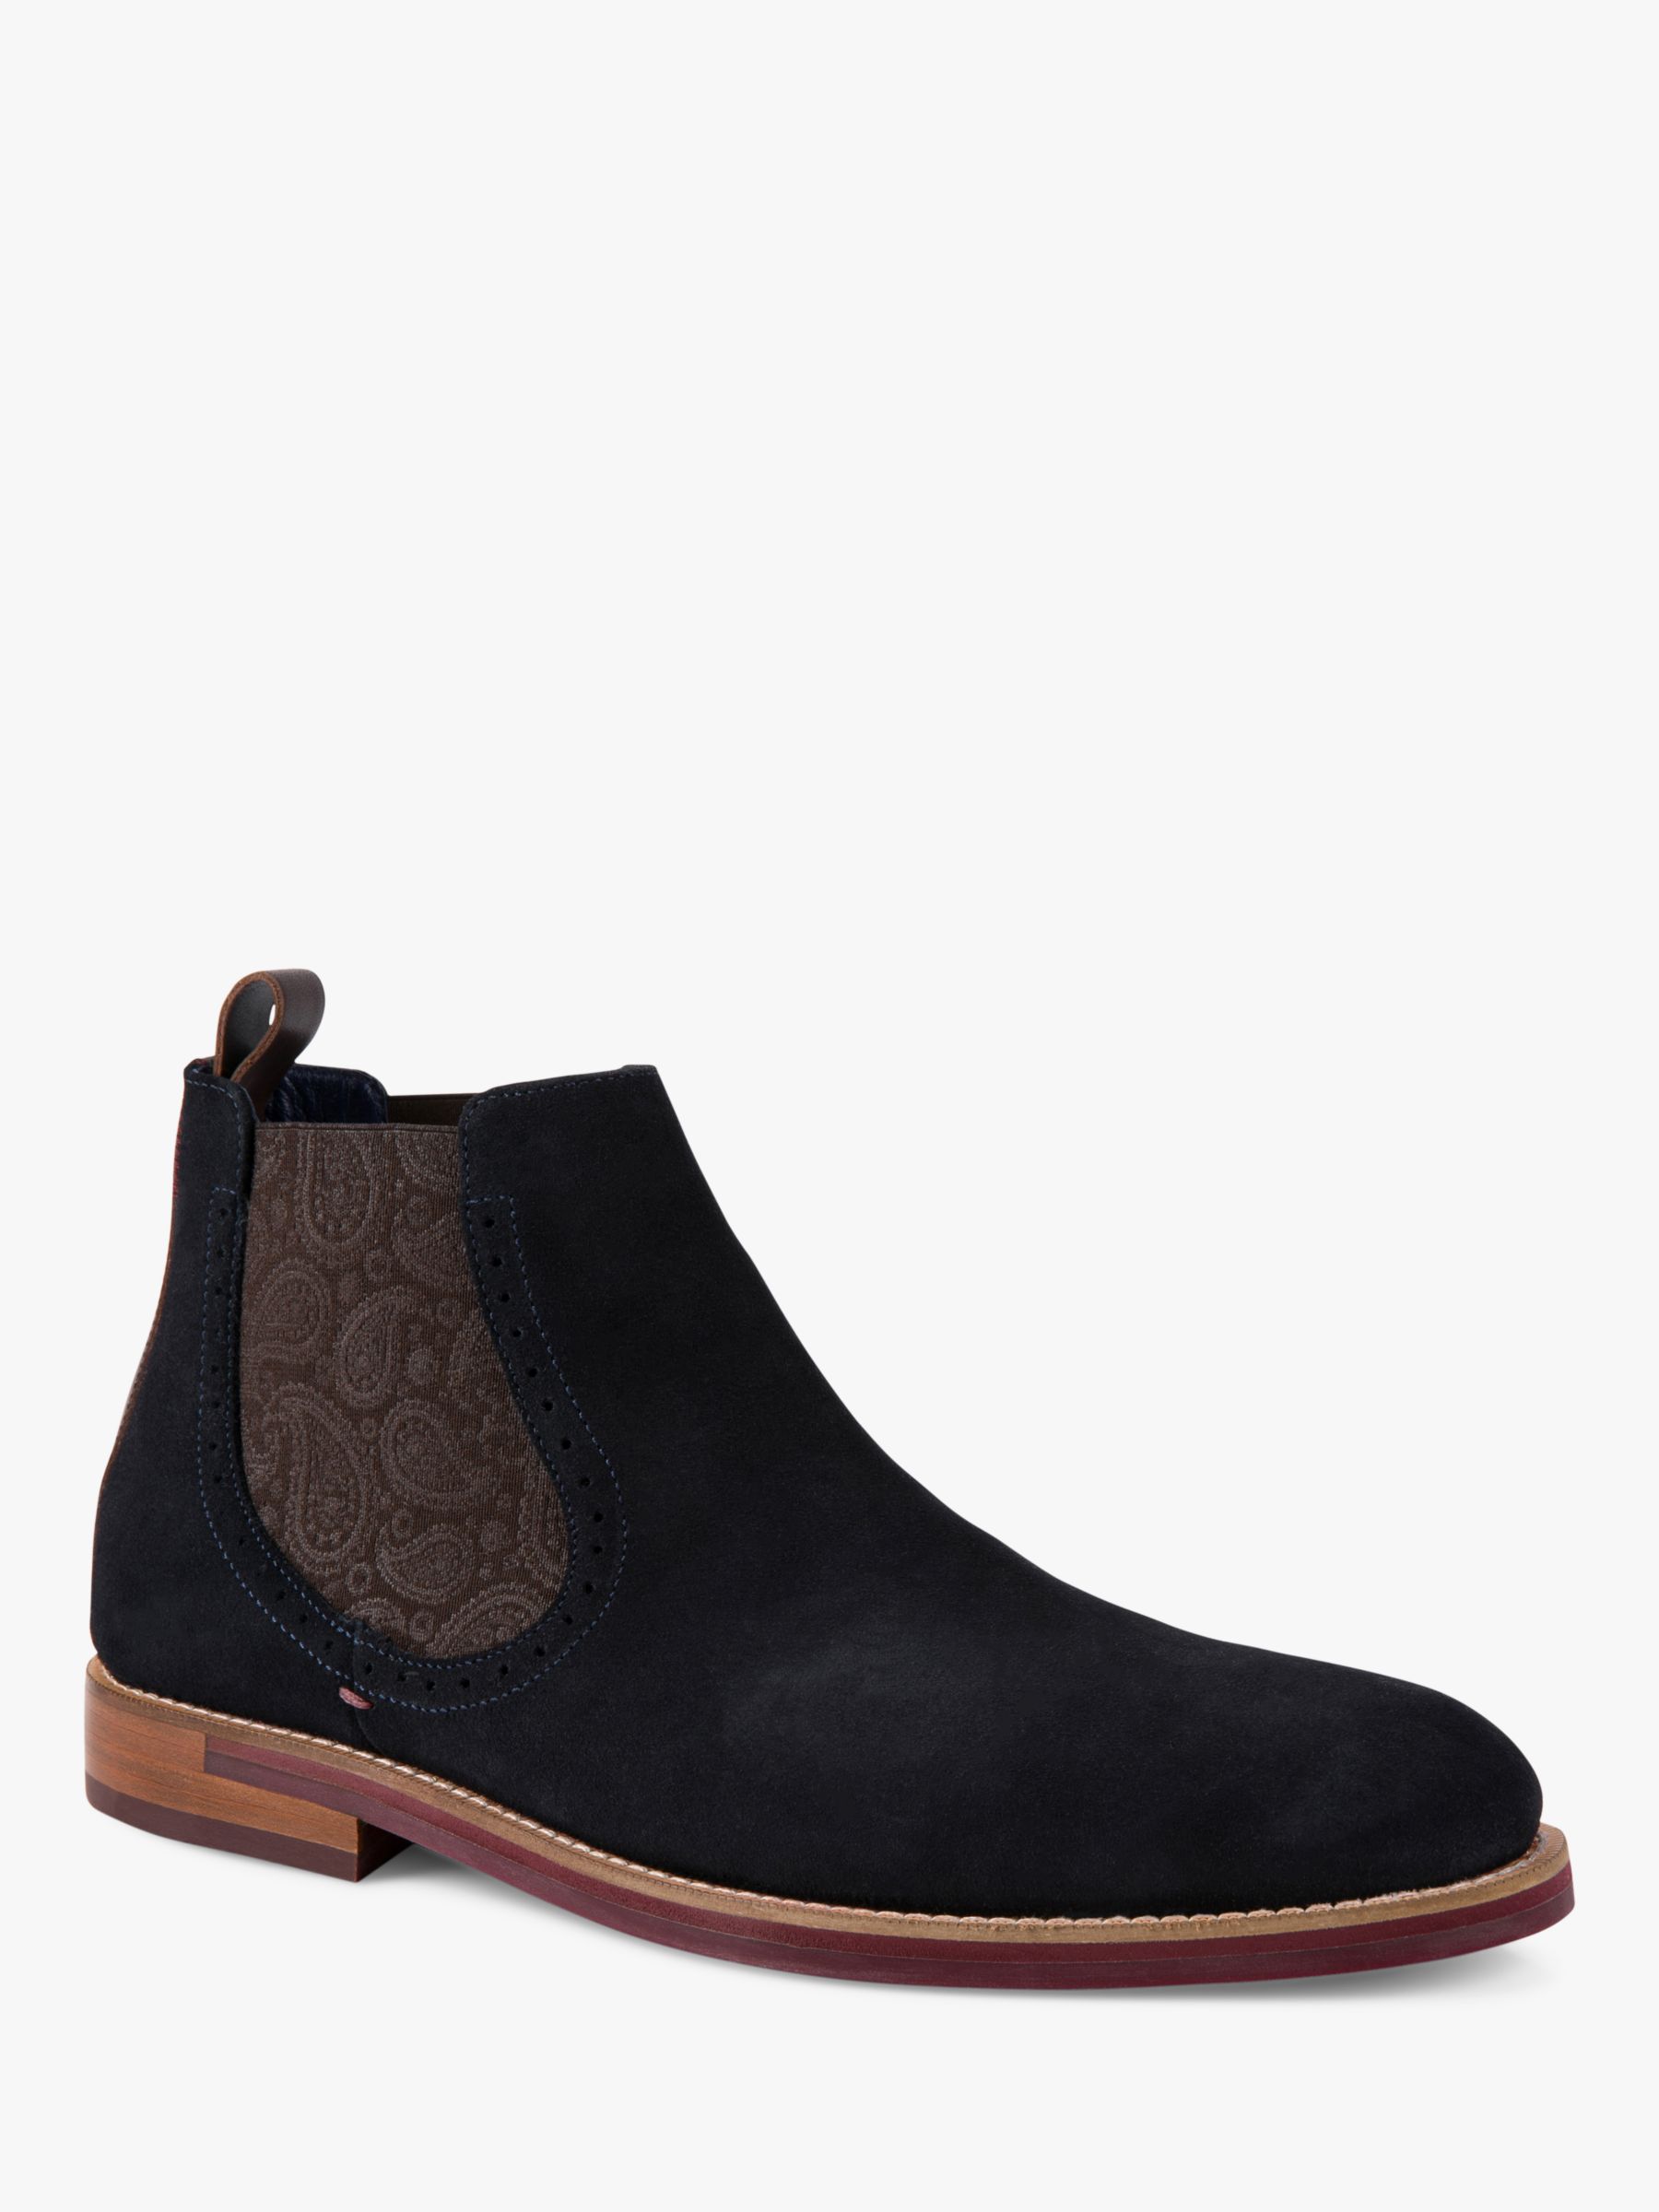 ted baker suede boots mens